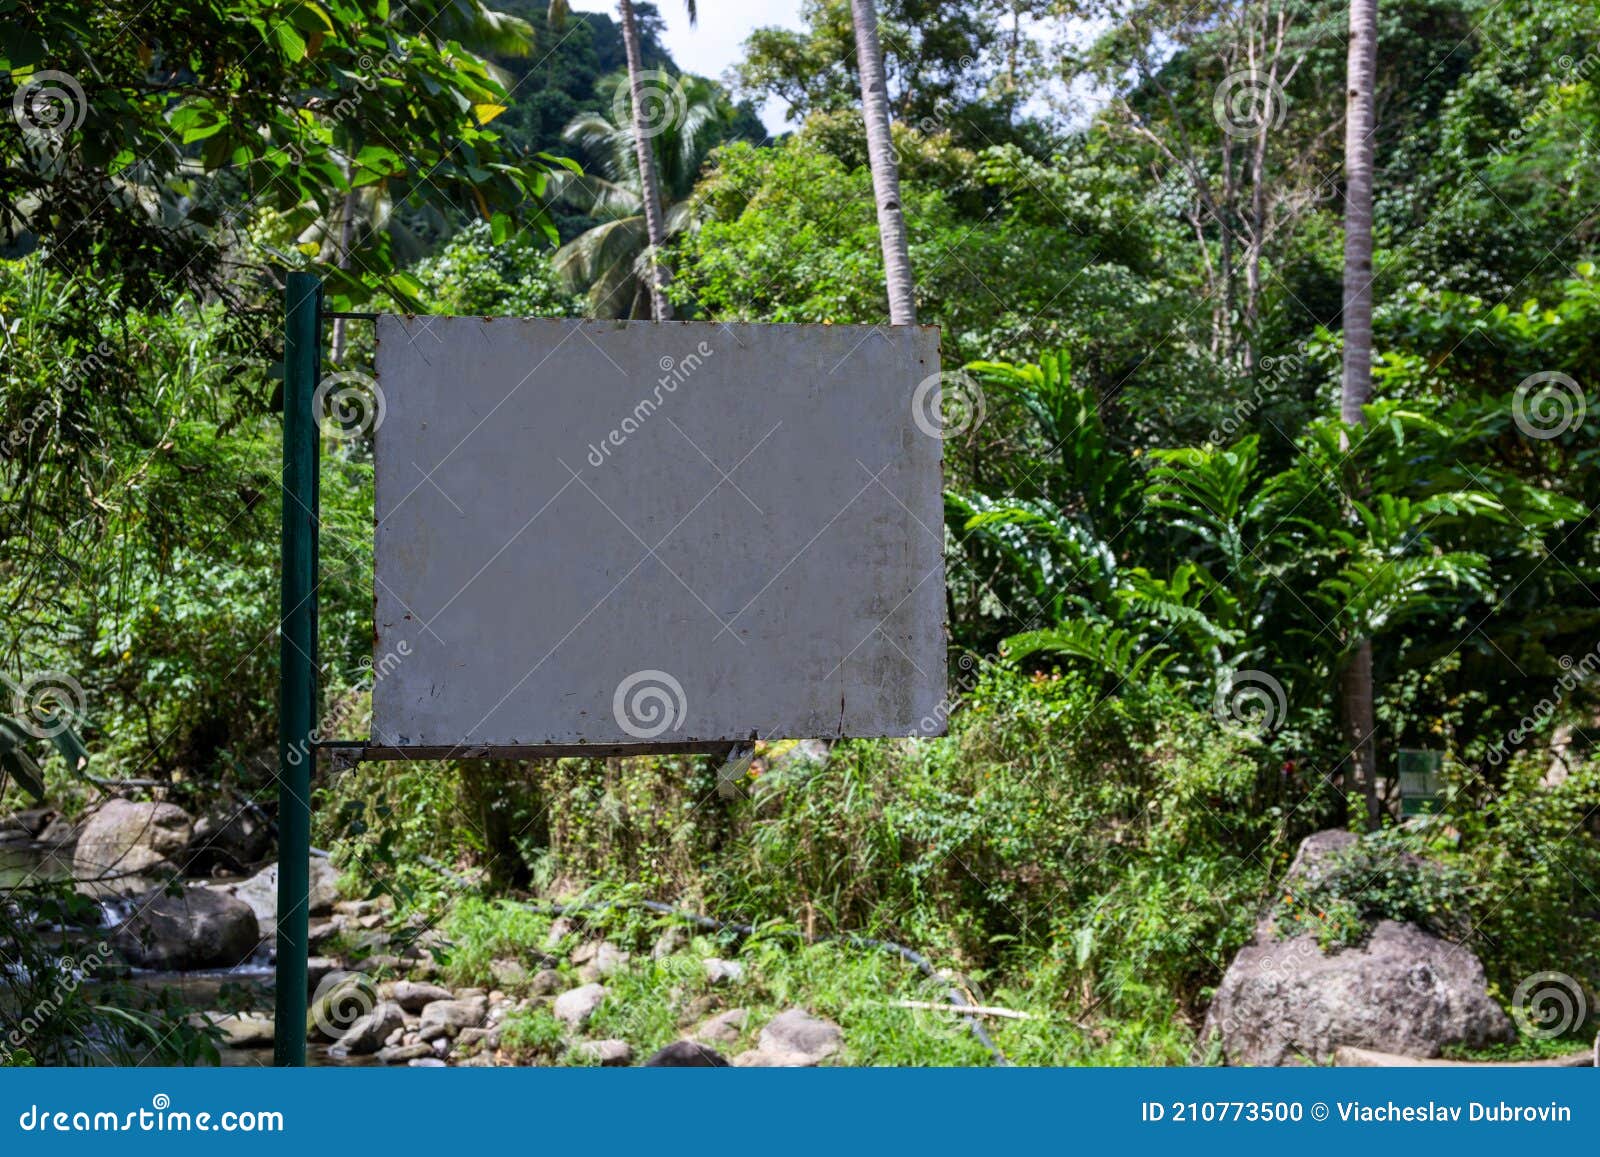 Blank Signpost in Green Forest. Empty Sign on Metallic Pillar in Tropical  Rainforest Stock Photo - Image of hotel, pillar: 210773500